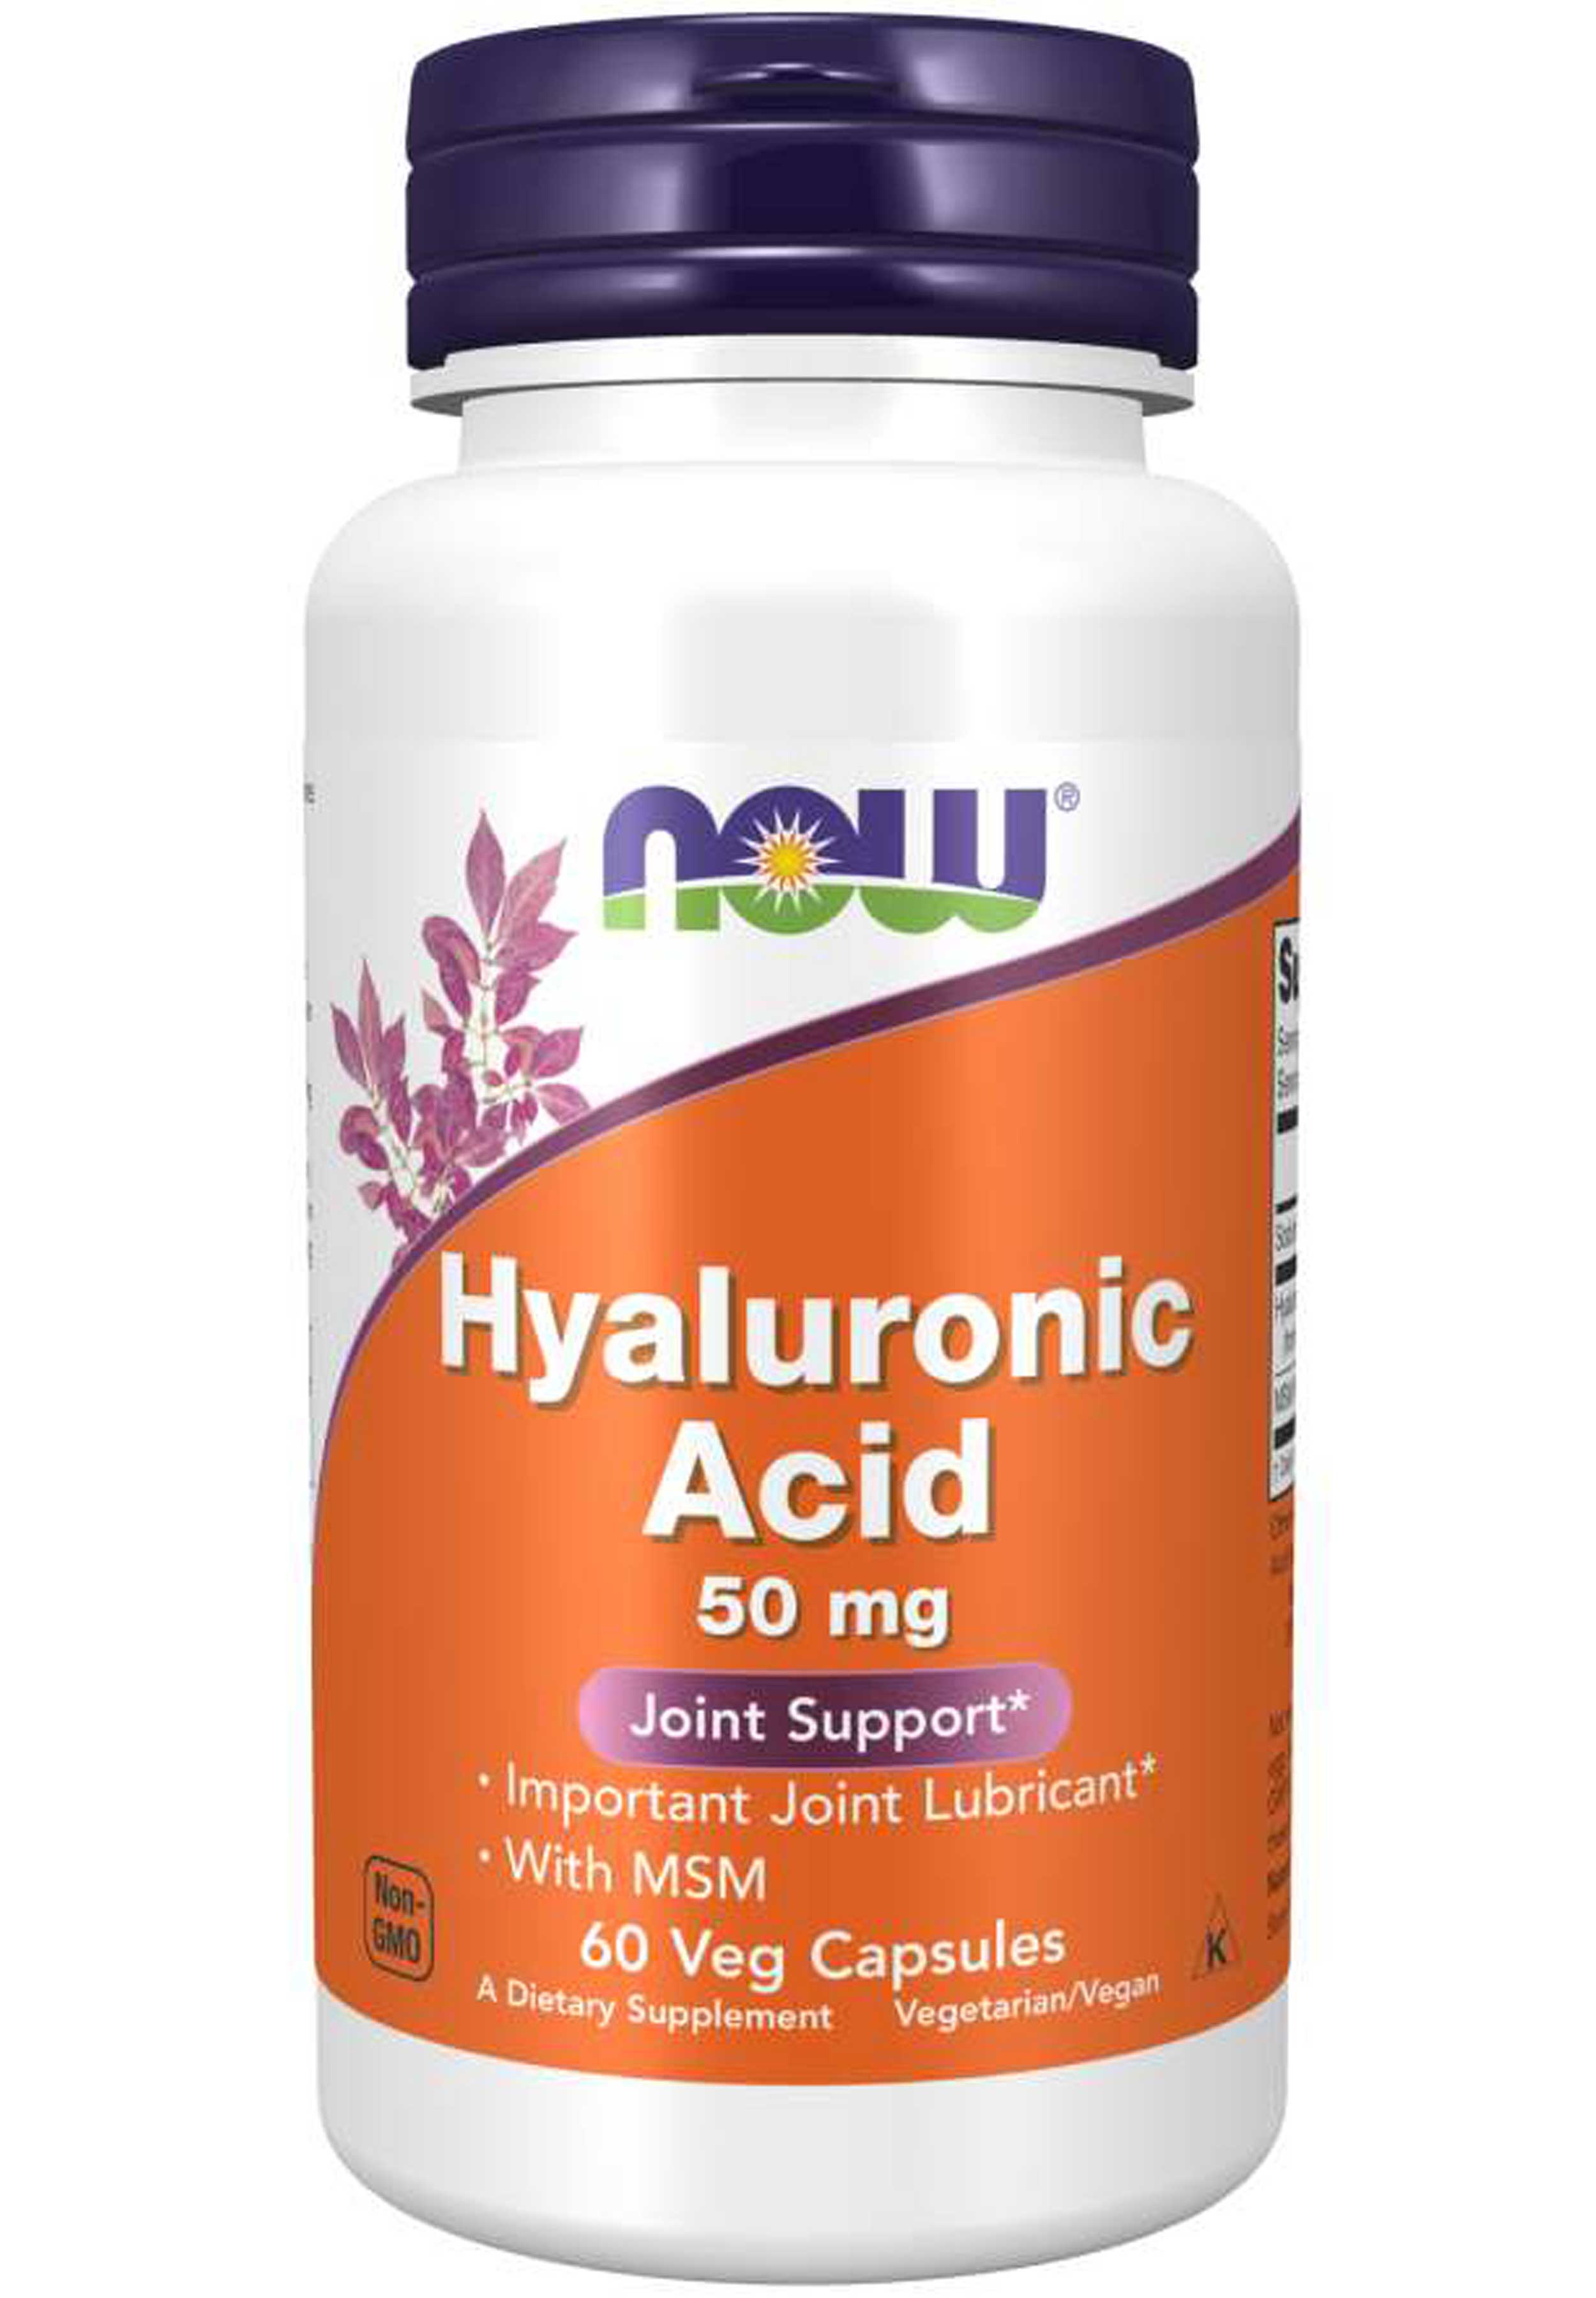 NOW Hyaluronic Acid with MSM 50 mg